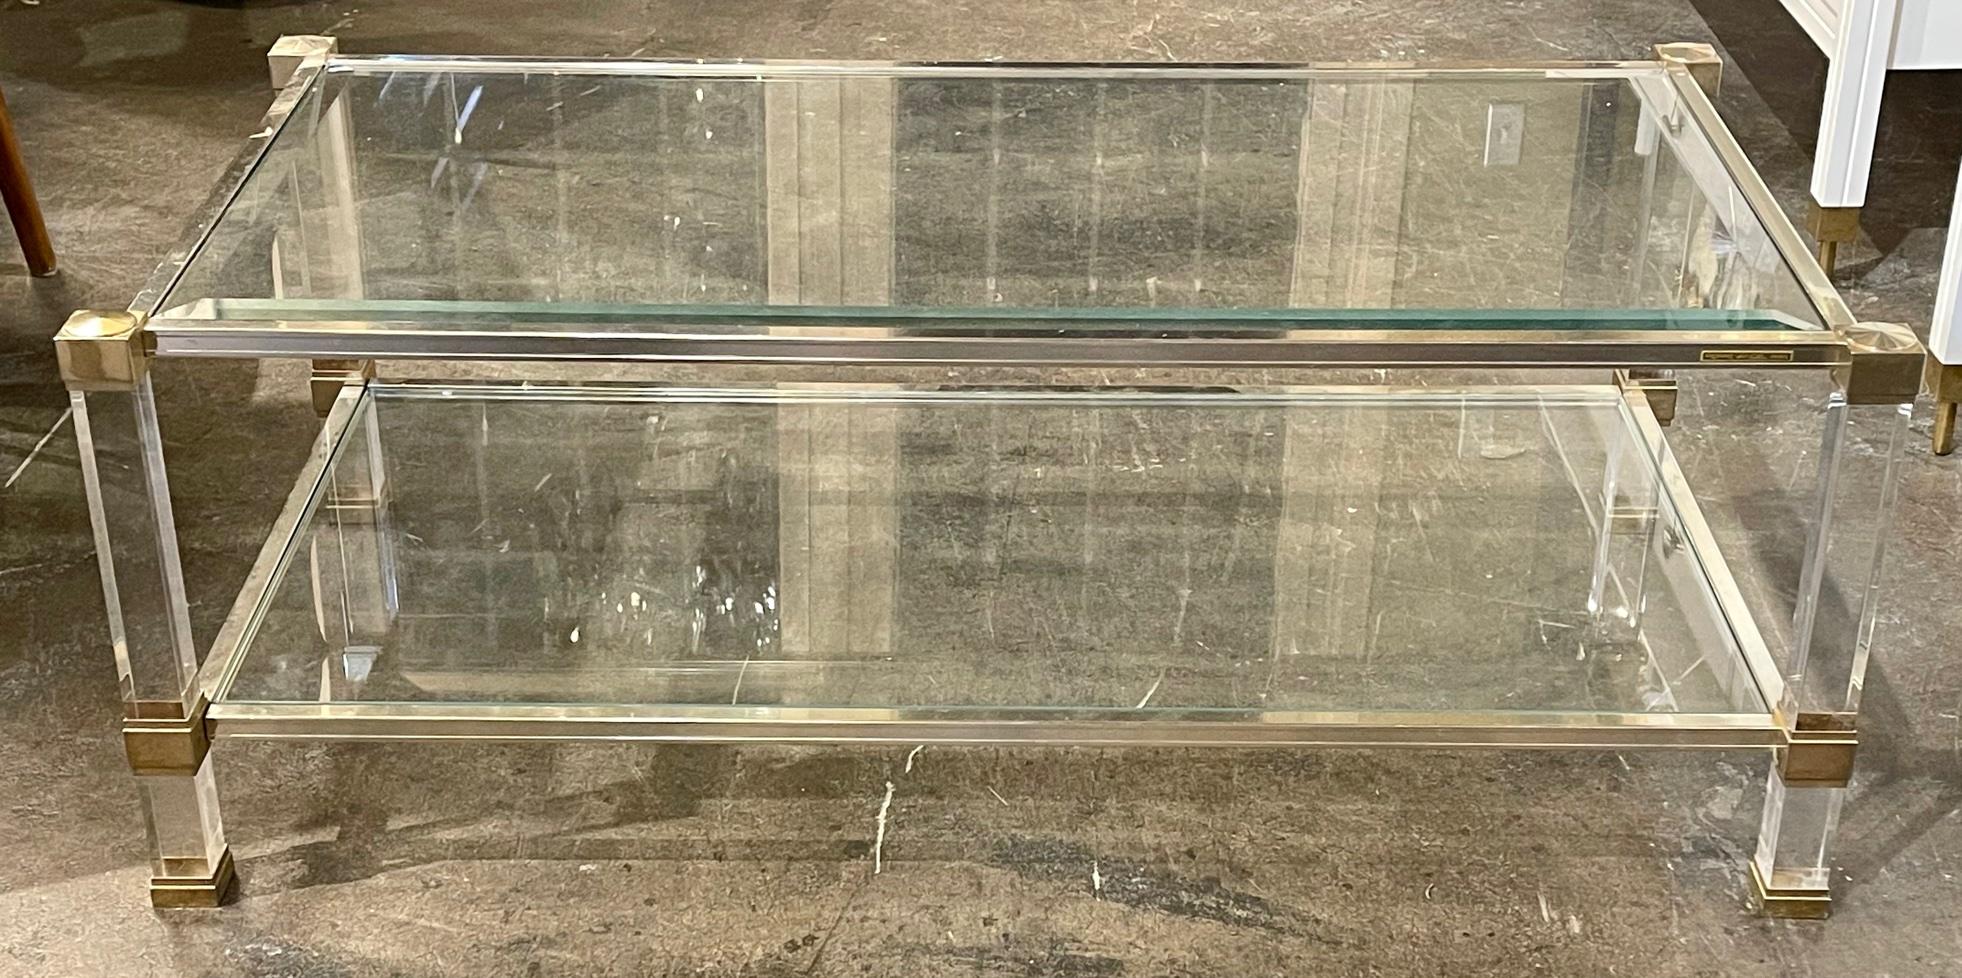 Mid-century French glass, lucite, and brass coffee table by Pierre Vandel Paris. Circa 1960. Perfect for todays eclectic design.